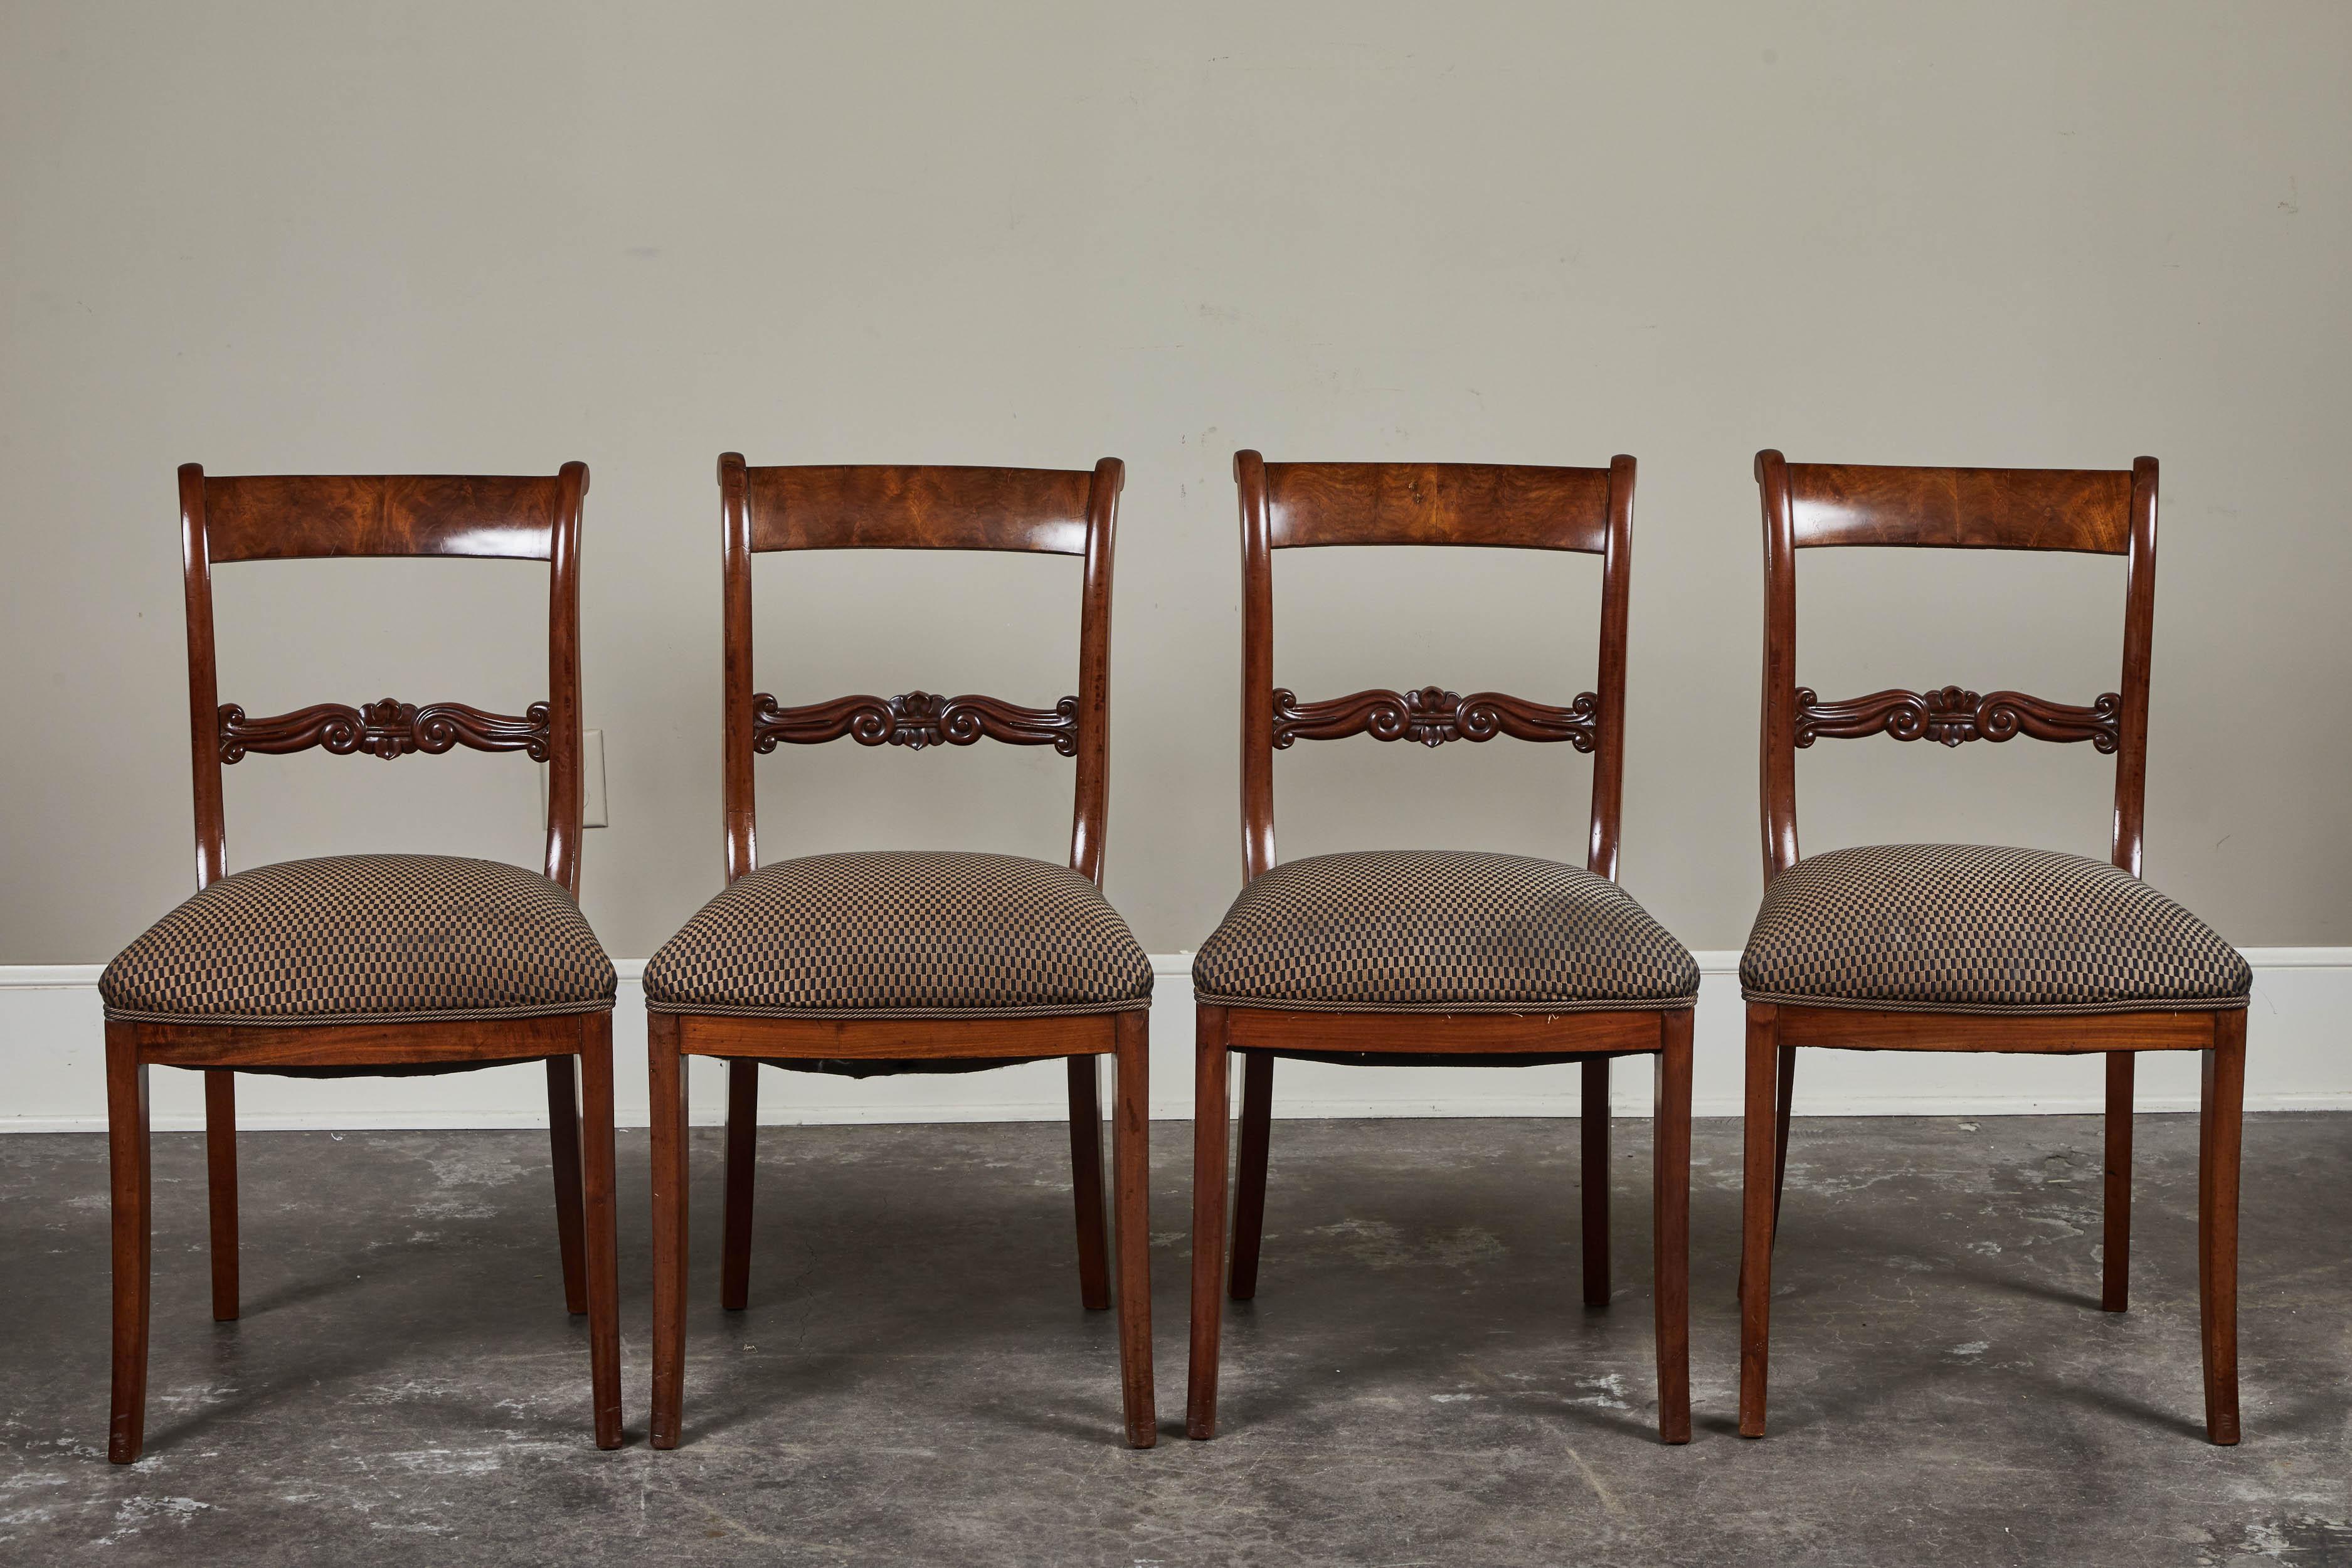 A set of six English mahogany dining chairs, circa 1840-1850. Pair of armchairs and four side chairs in this set. Rich mahogany with upholstered seats.